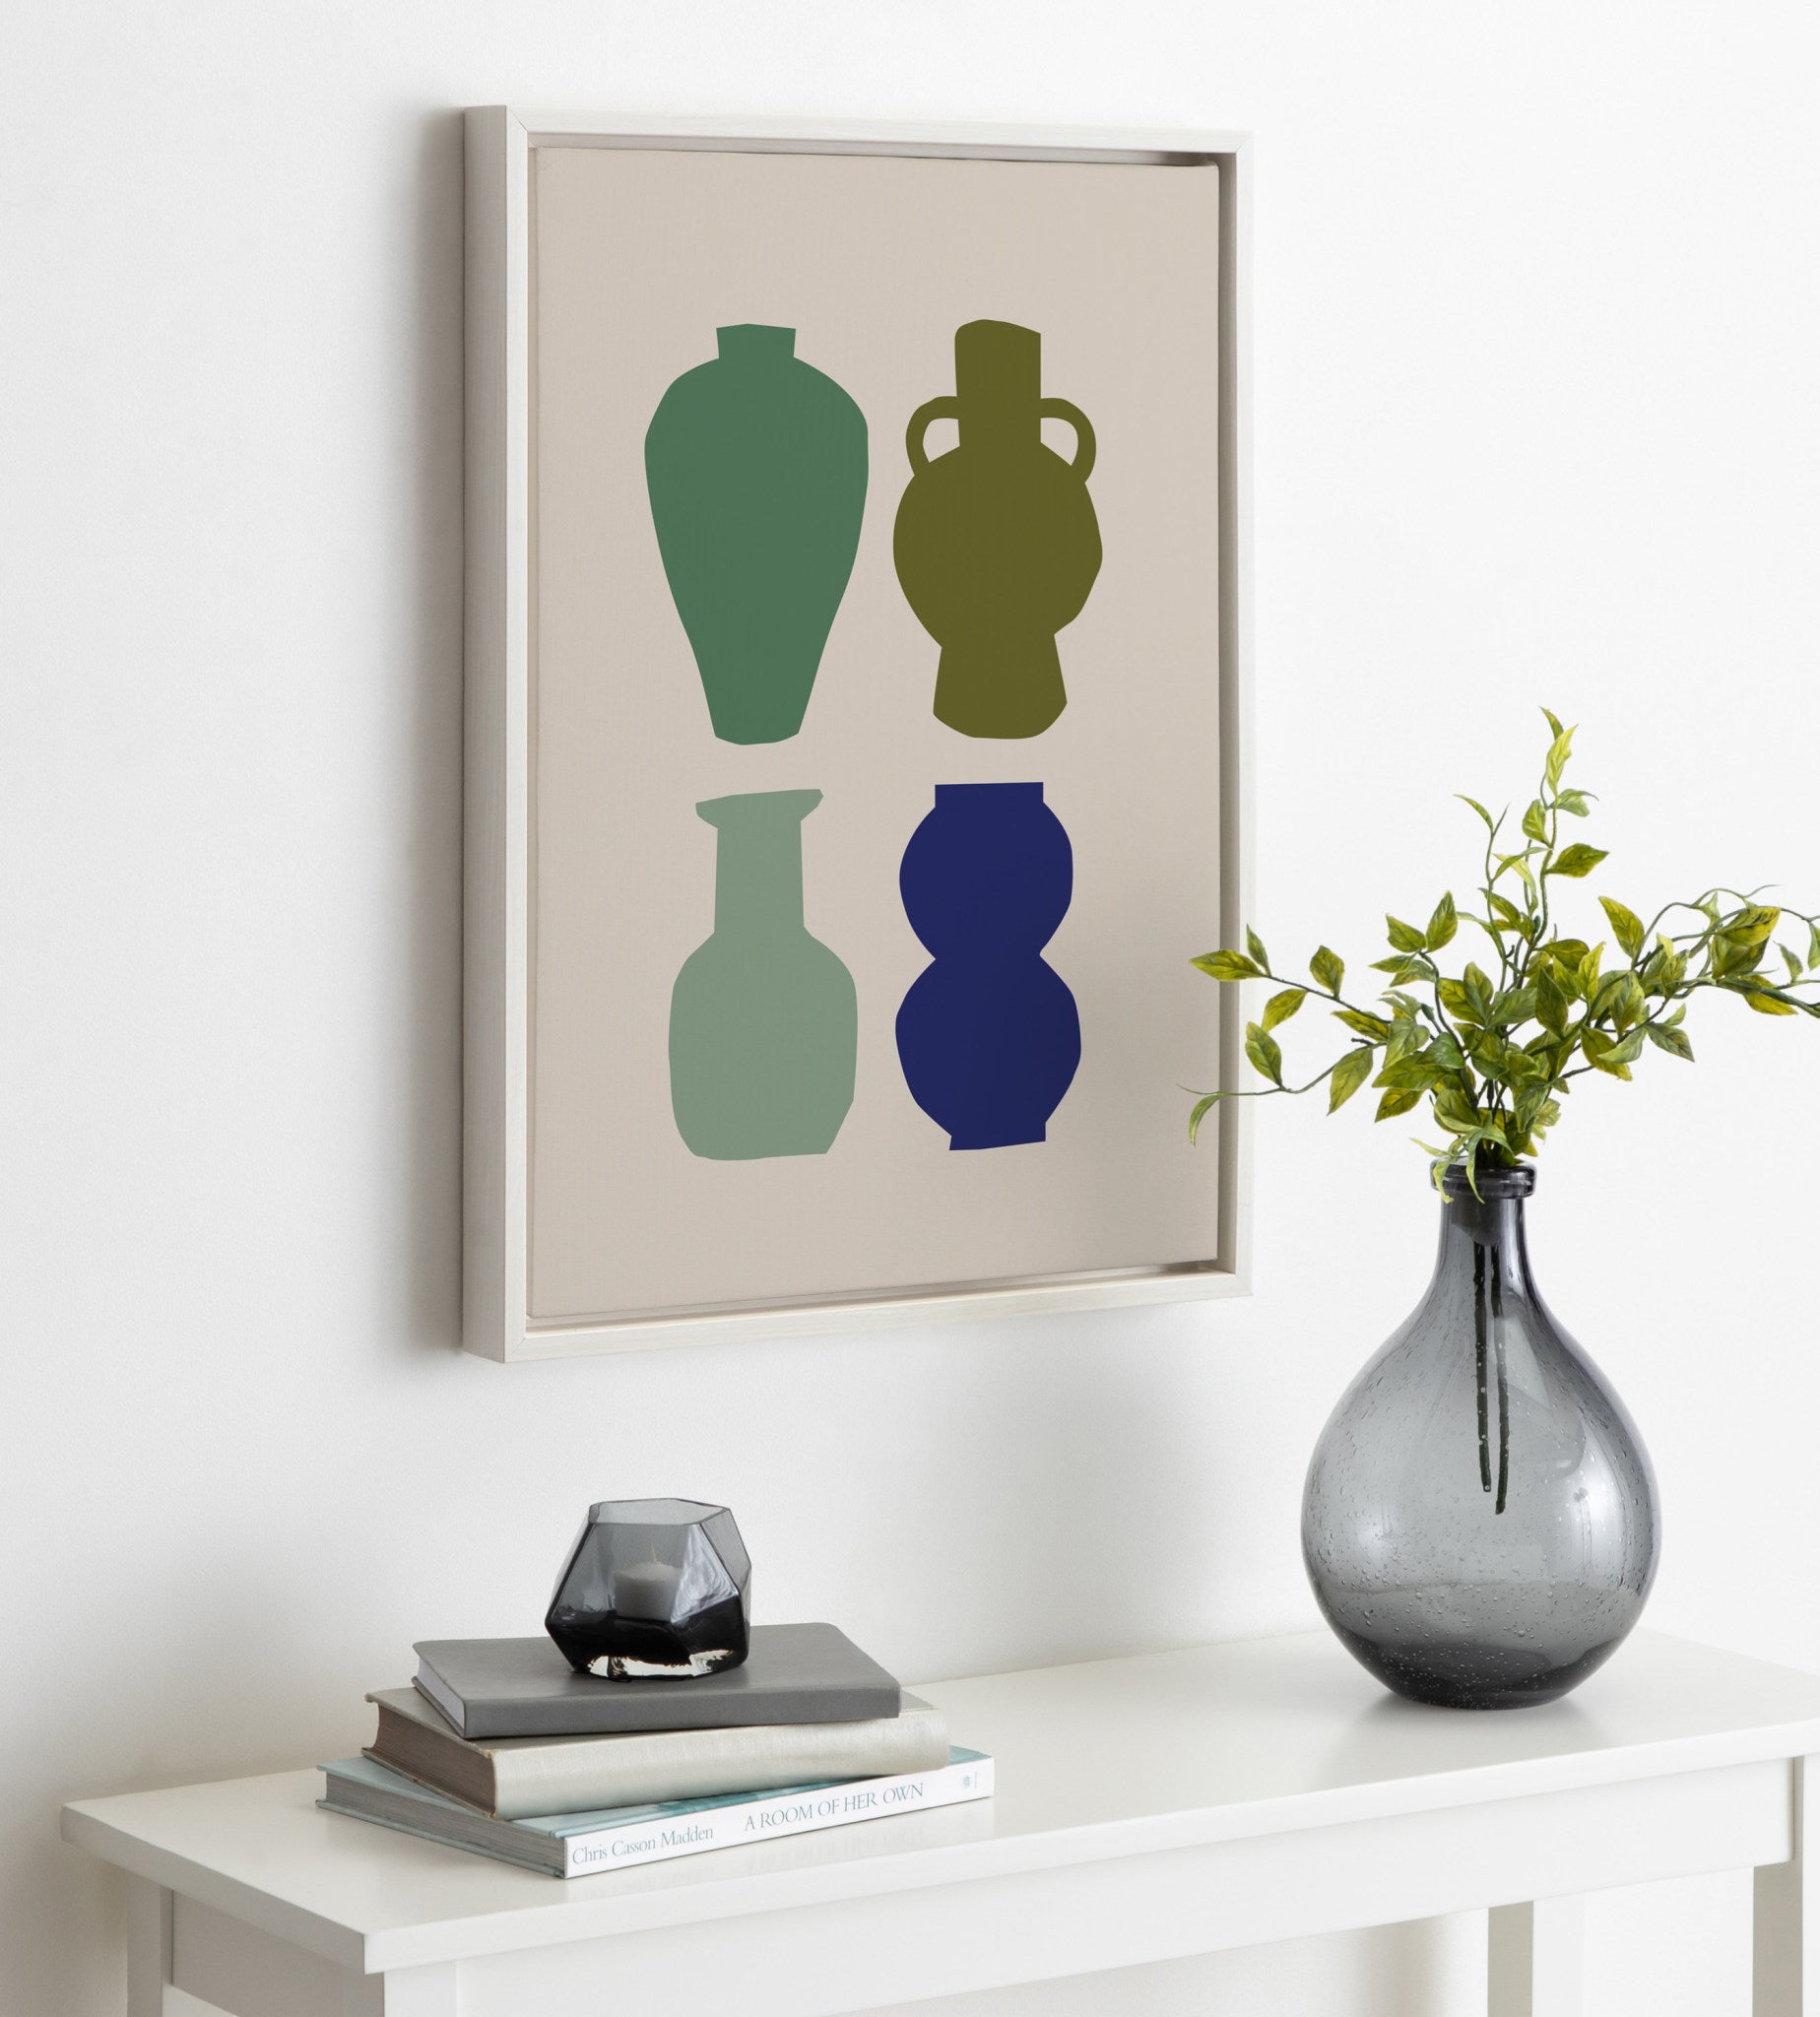 Sylvie Colorful Retro Vases Green and Blue Framed Canvas by The Creative Bunch Studio